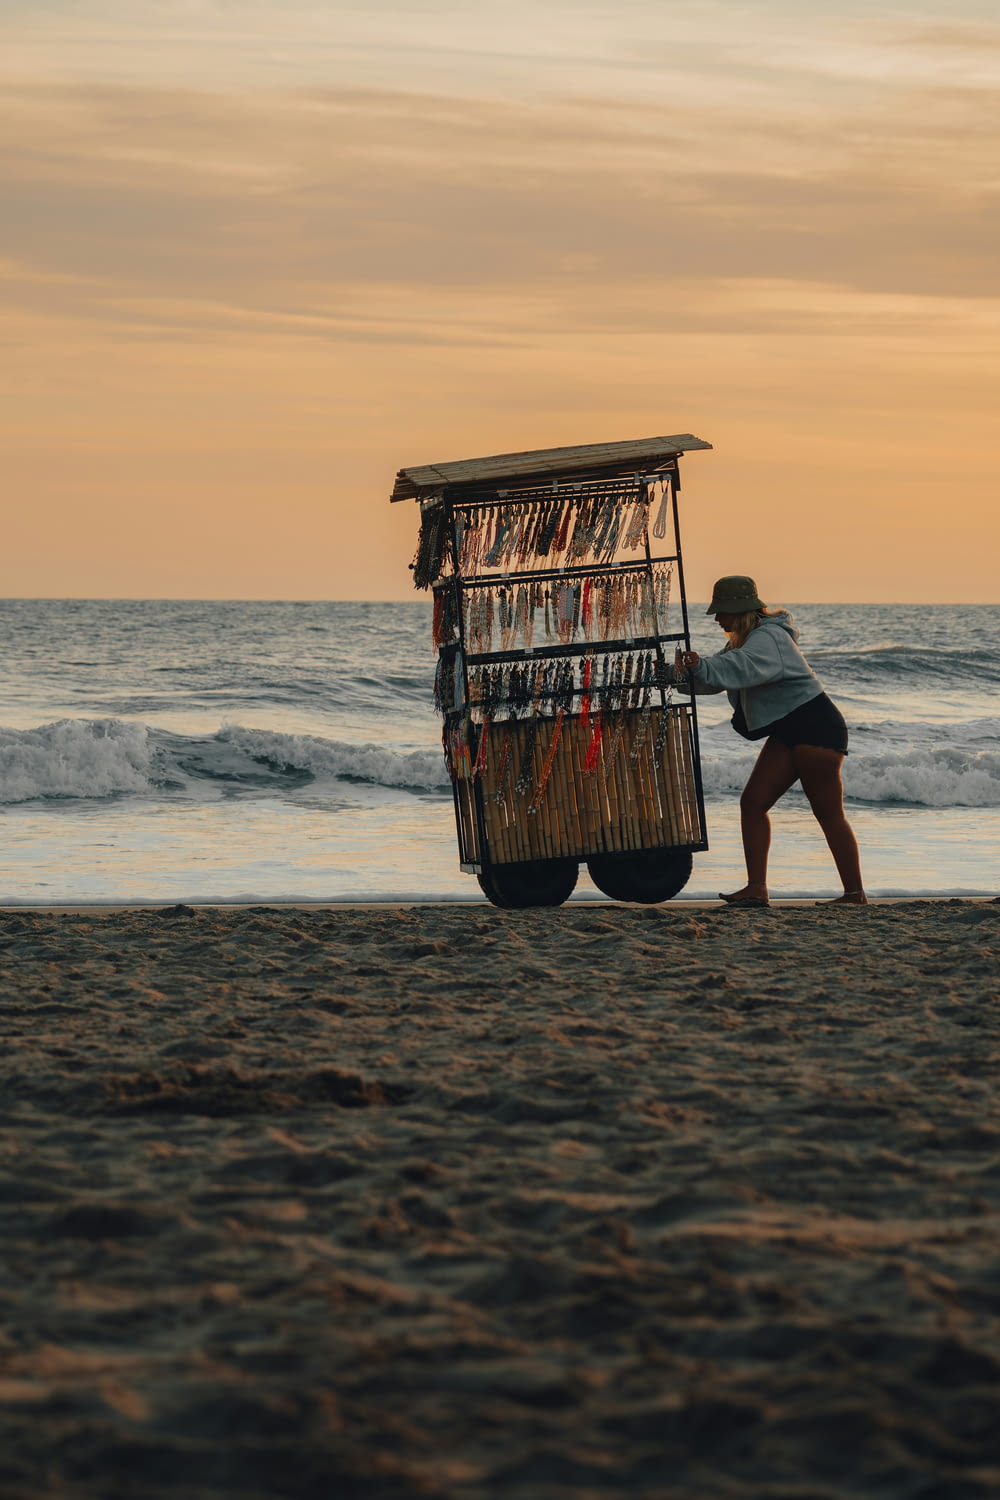 a woman pushing a cart on the beach